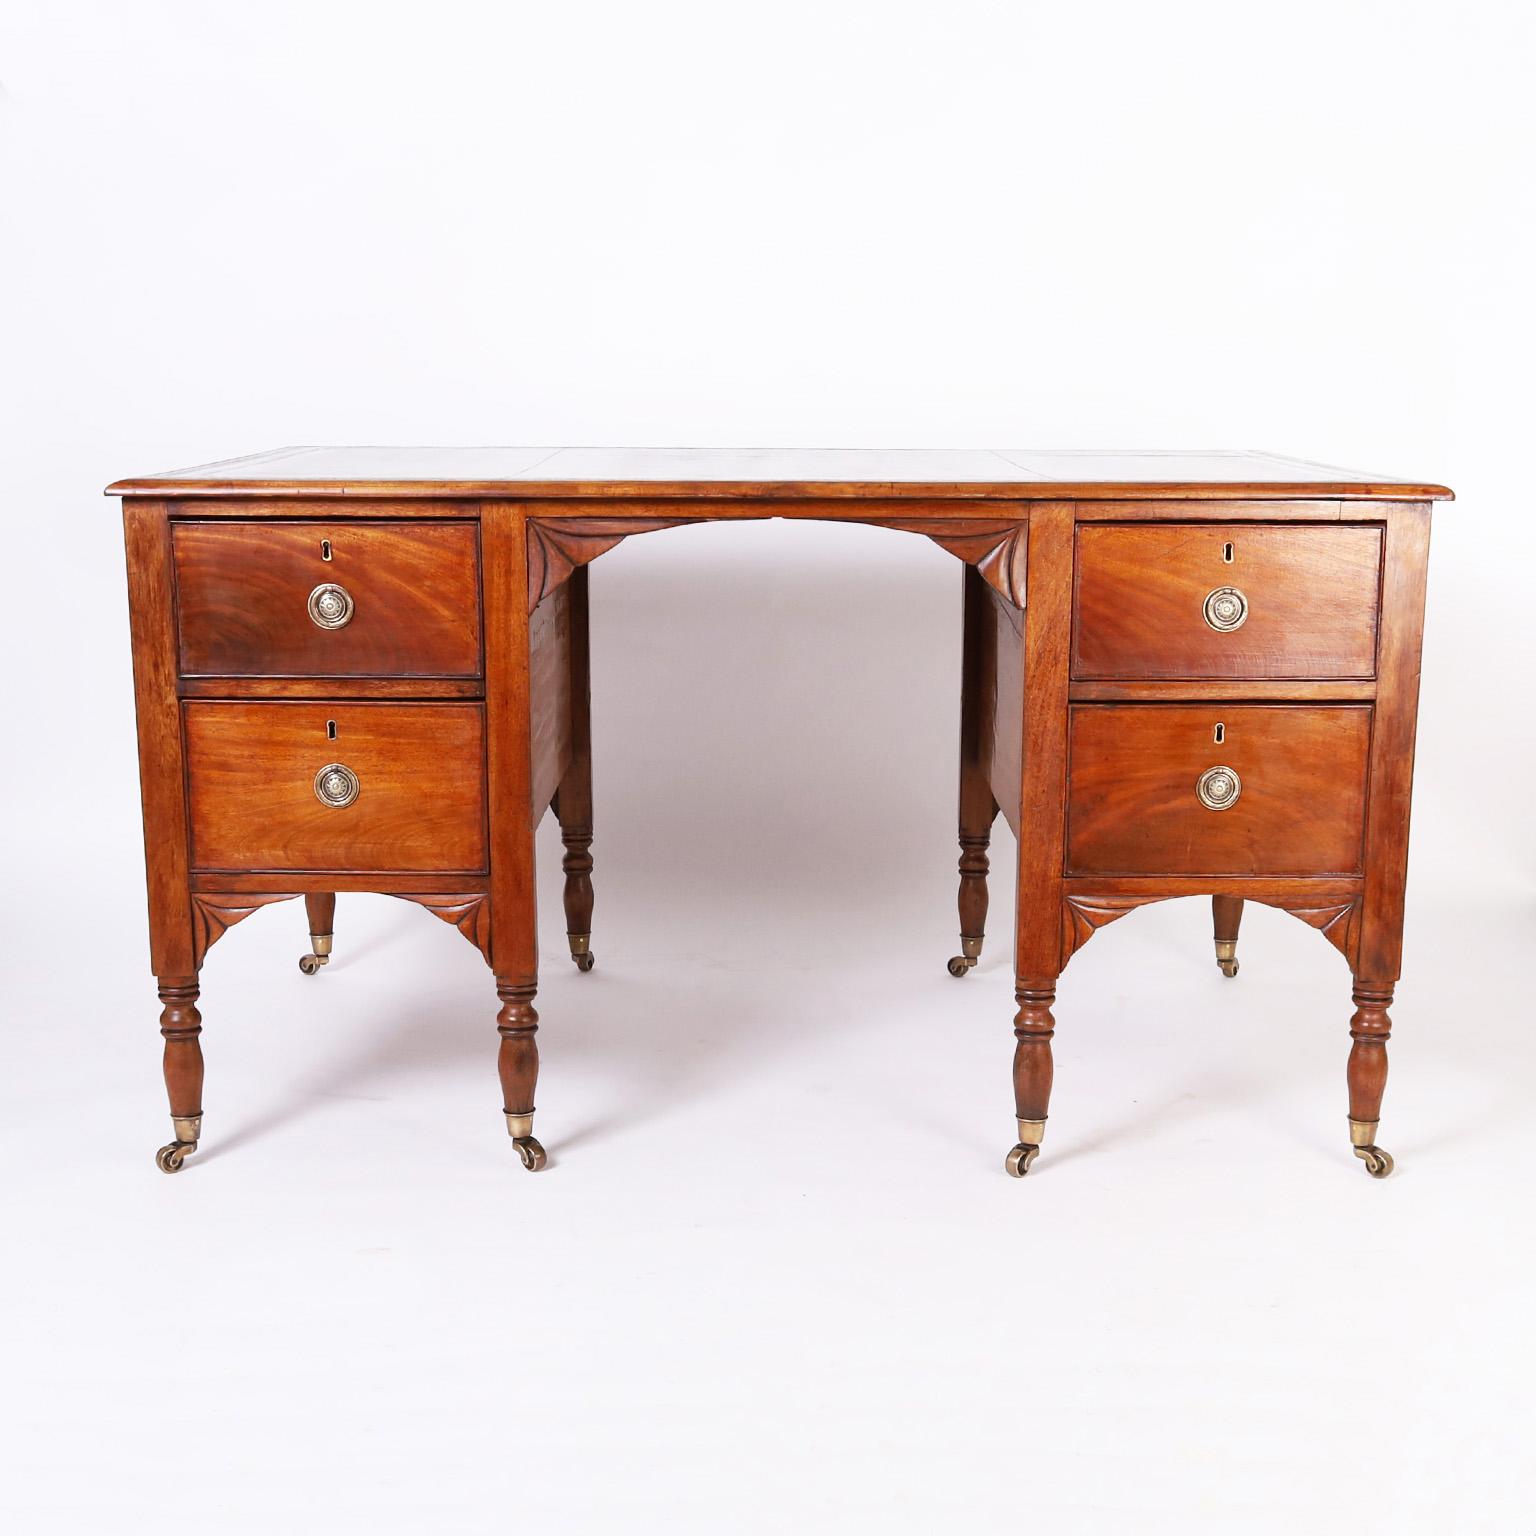 Rare and remarkable antique George III style partners desk with the original tooled green leather top on a mahogany case with four drawers on either side, brass hardware, stylized fan brackets, and turned legs with brass casters.